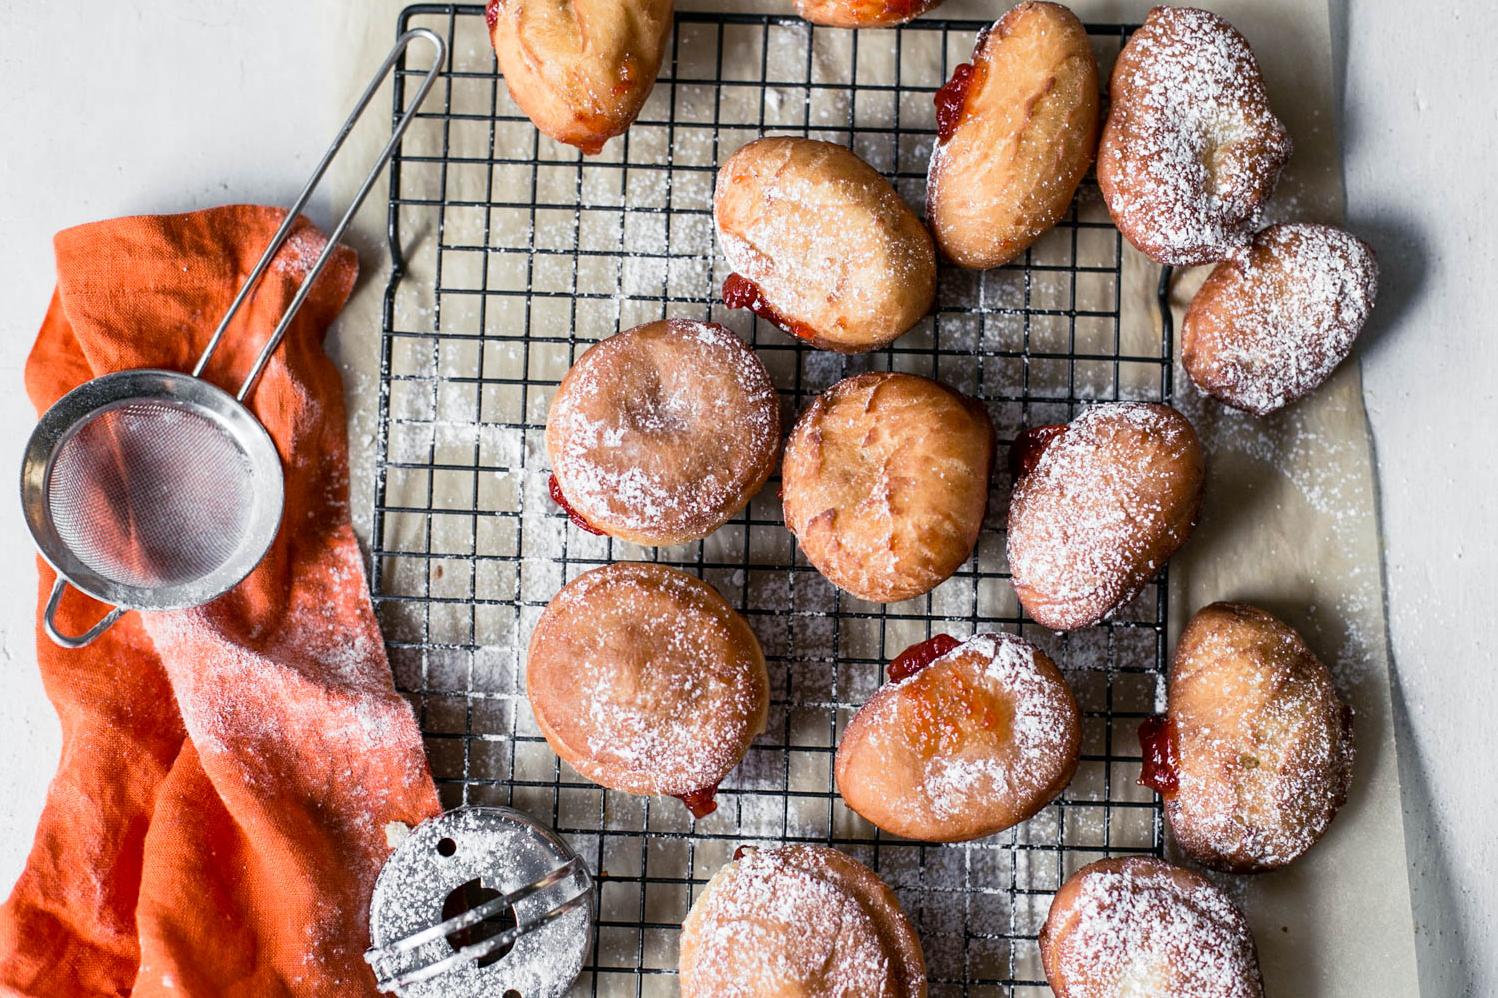  Sweet, fluffy and glazed to perfection, these sufganiyot will make your taste buds party like it's Hanukkah.